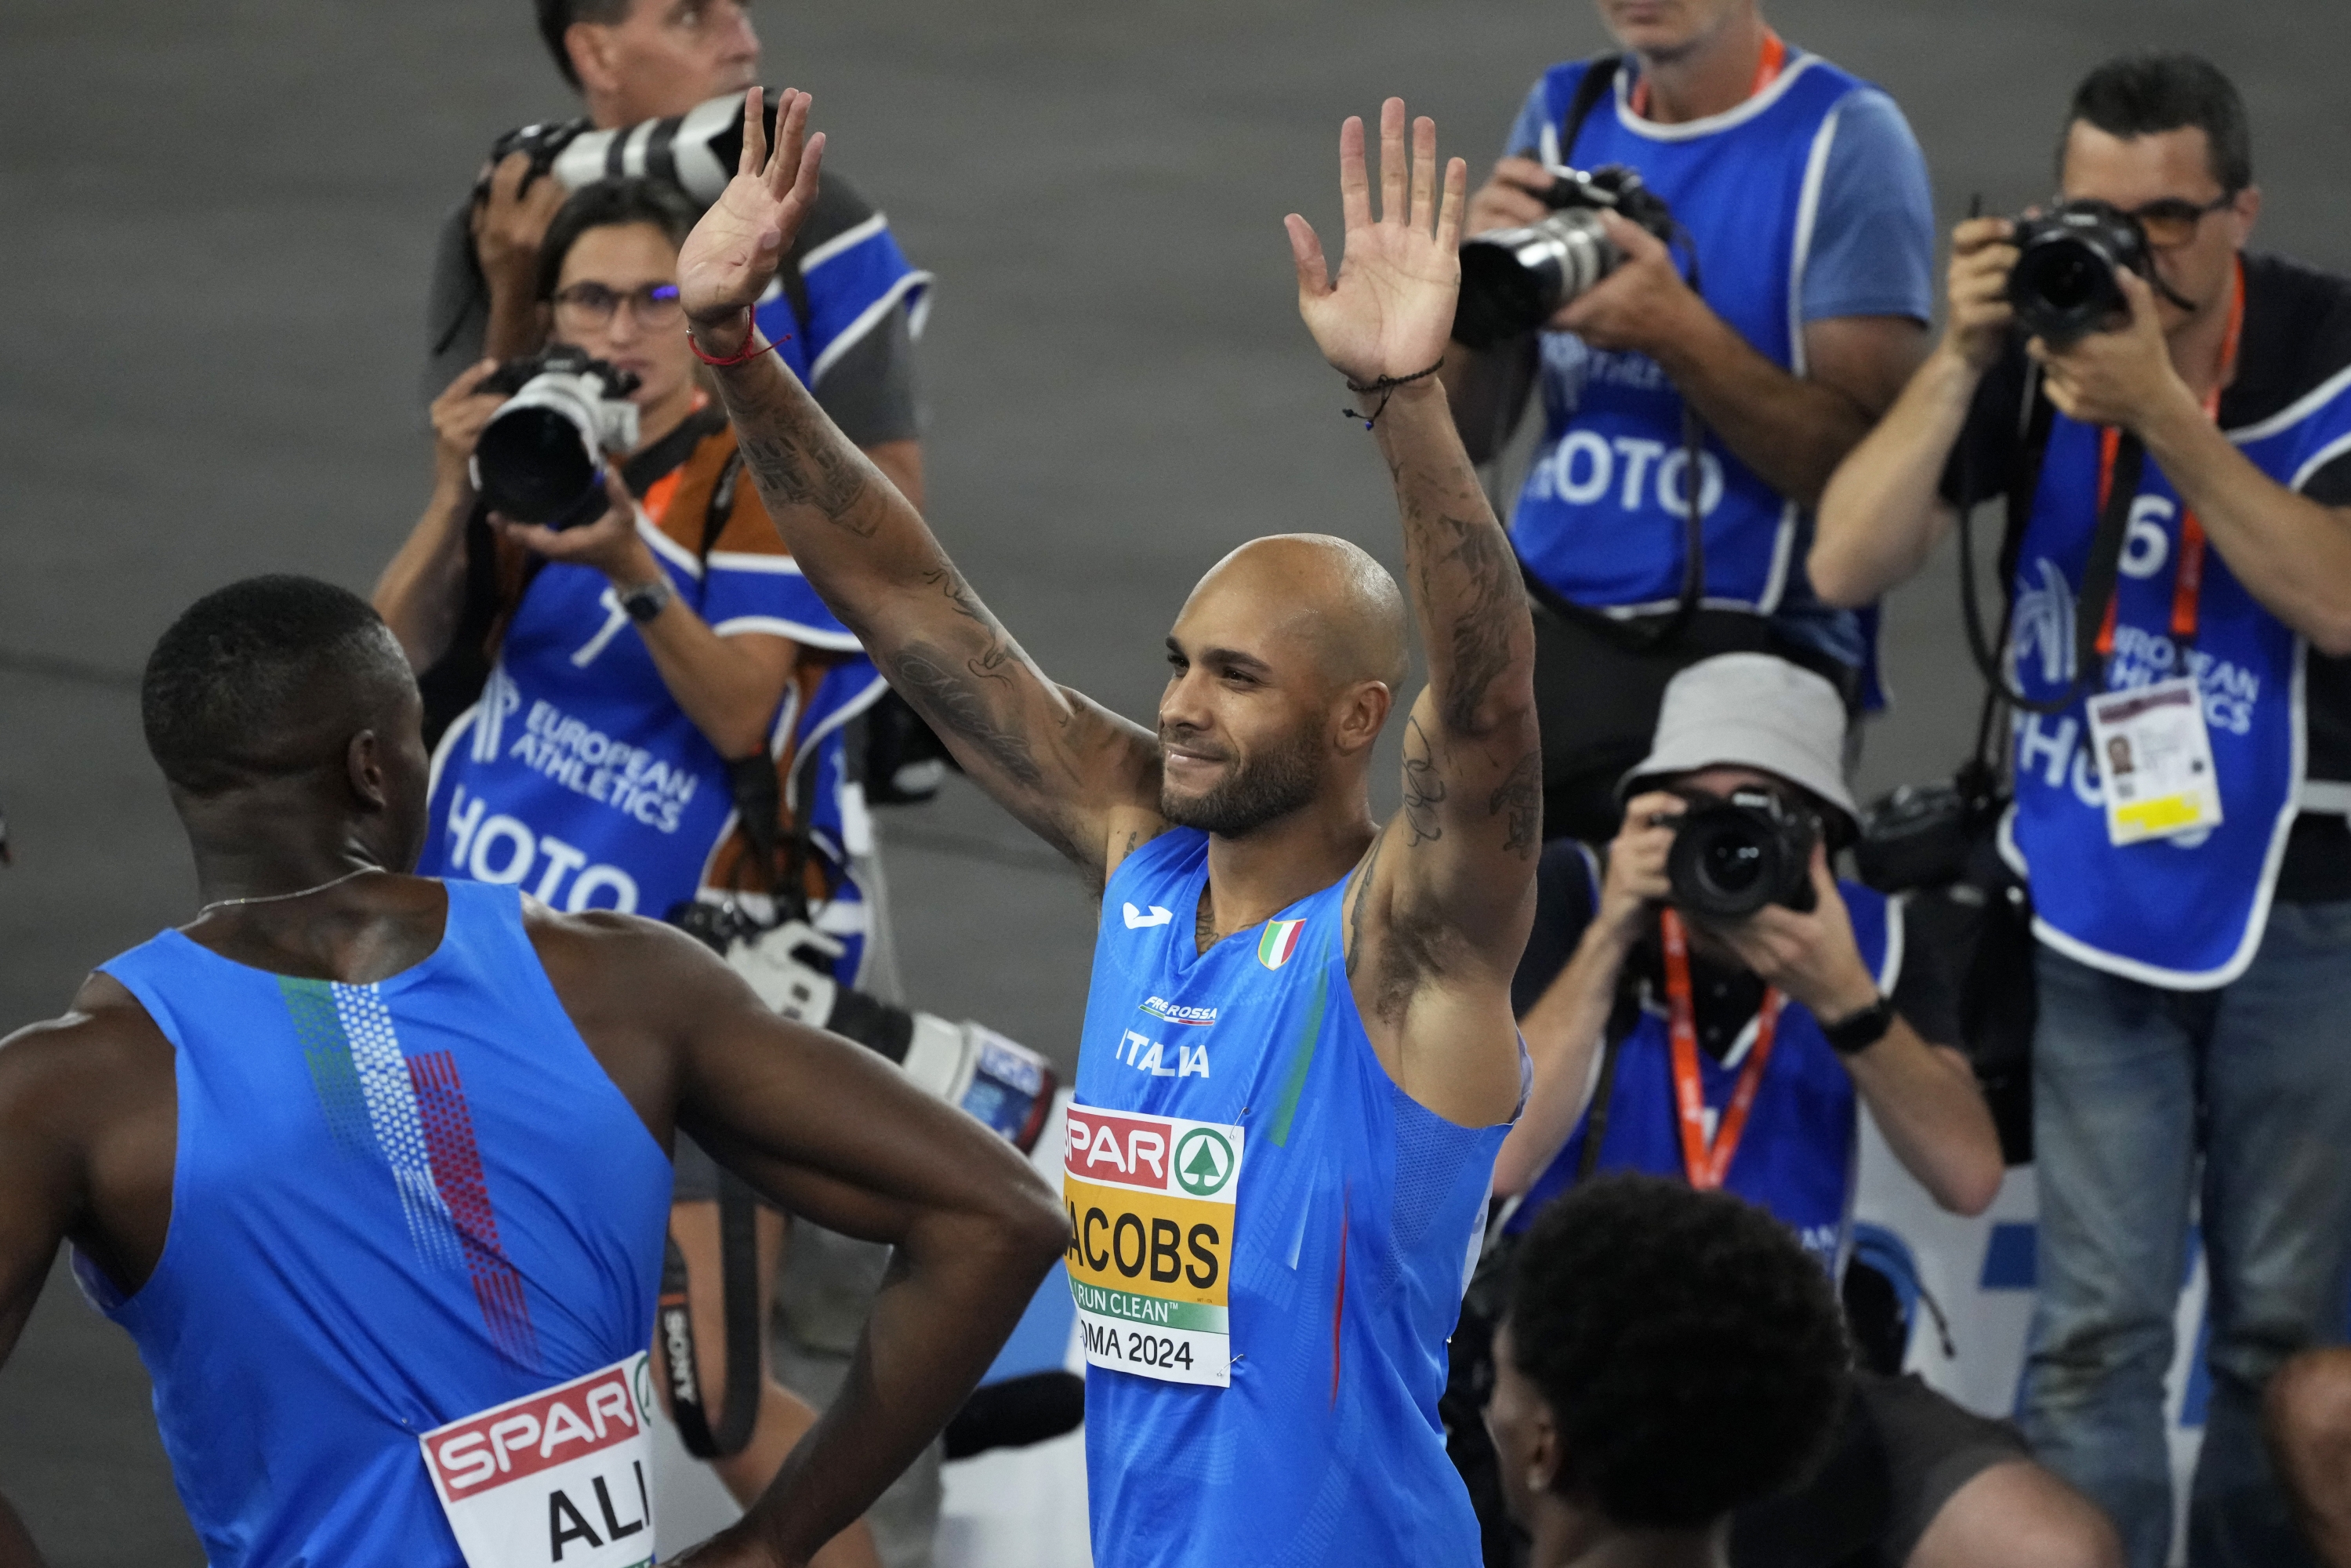 FILE - Lamont Marcell Jacobs, of Italy, celebrates after winning the gold medal in the men's 100 meters final at the the European Athletics Championships in Rome, Saturday, June 8, 2024. At the last two Olympics ? one summer, one winter ? there were no crowds because of the COVID pandemic. In Paris this summer, once again, all those fans, family members and the burst of energy they bring to all the fun and games will be back. (AP Photo/Gregorio Borgia, File)